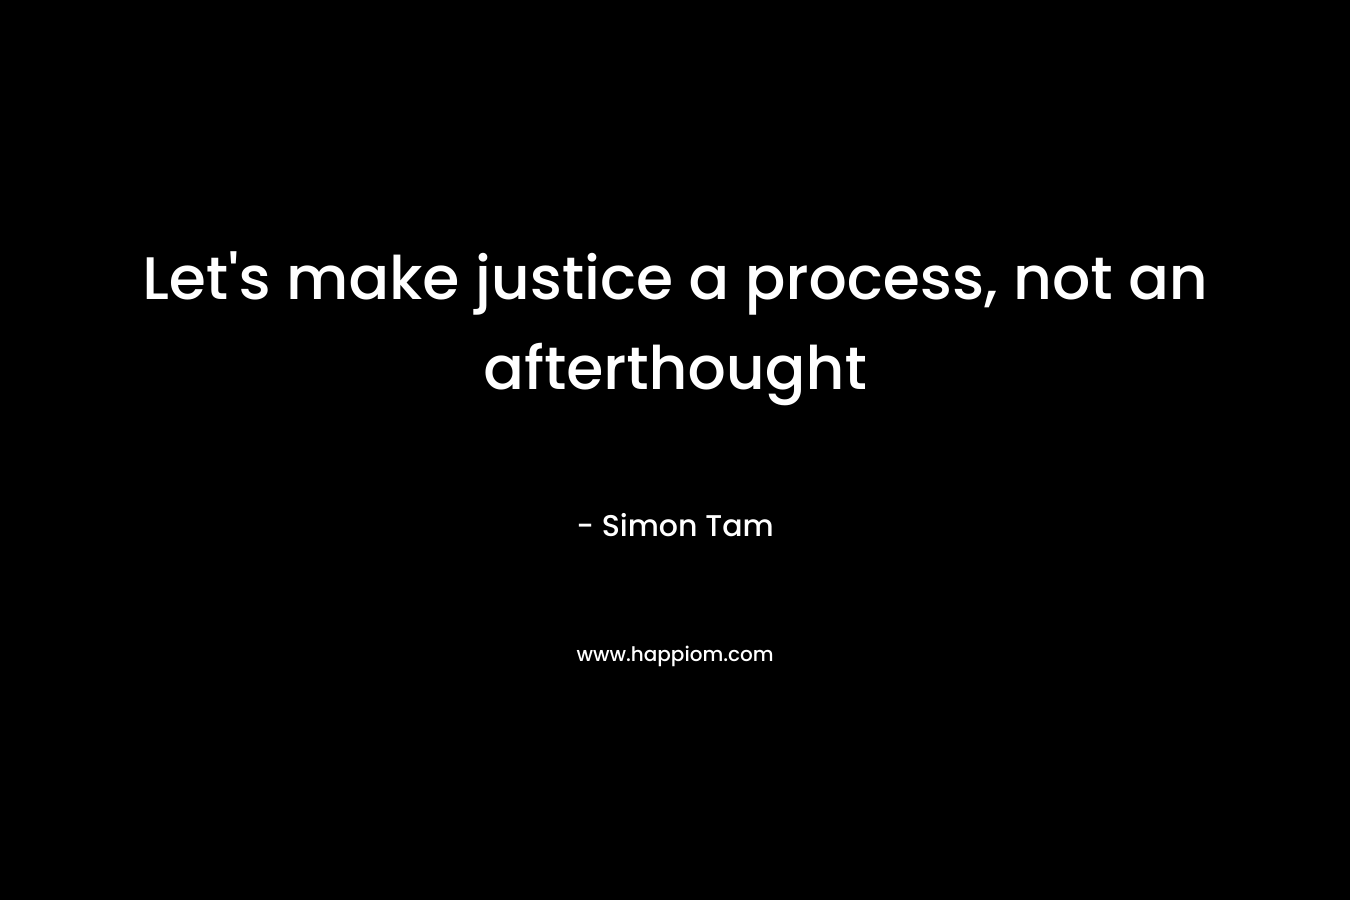 Let's make justice a process, not an afterthought